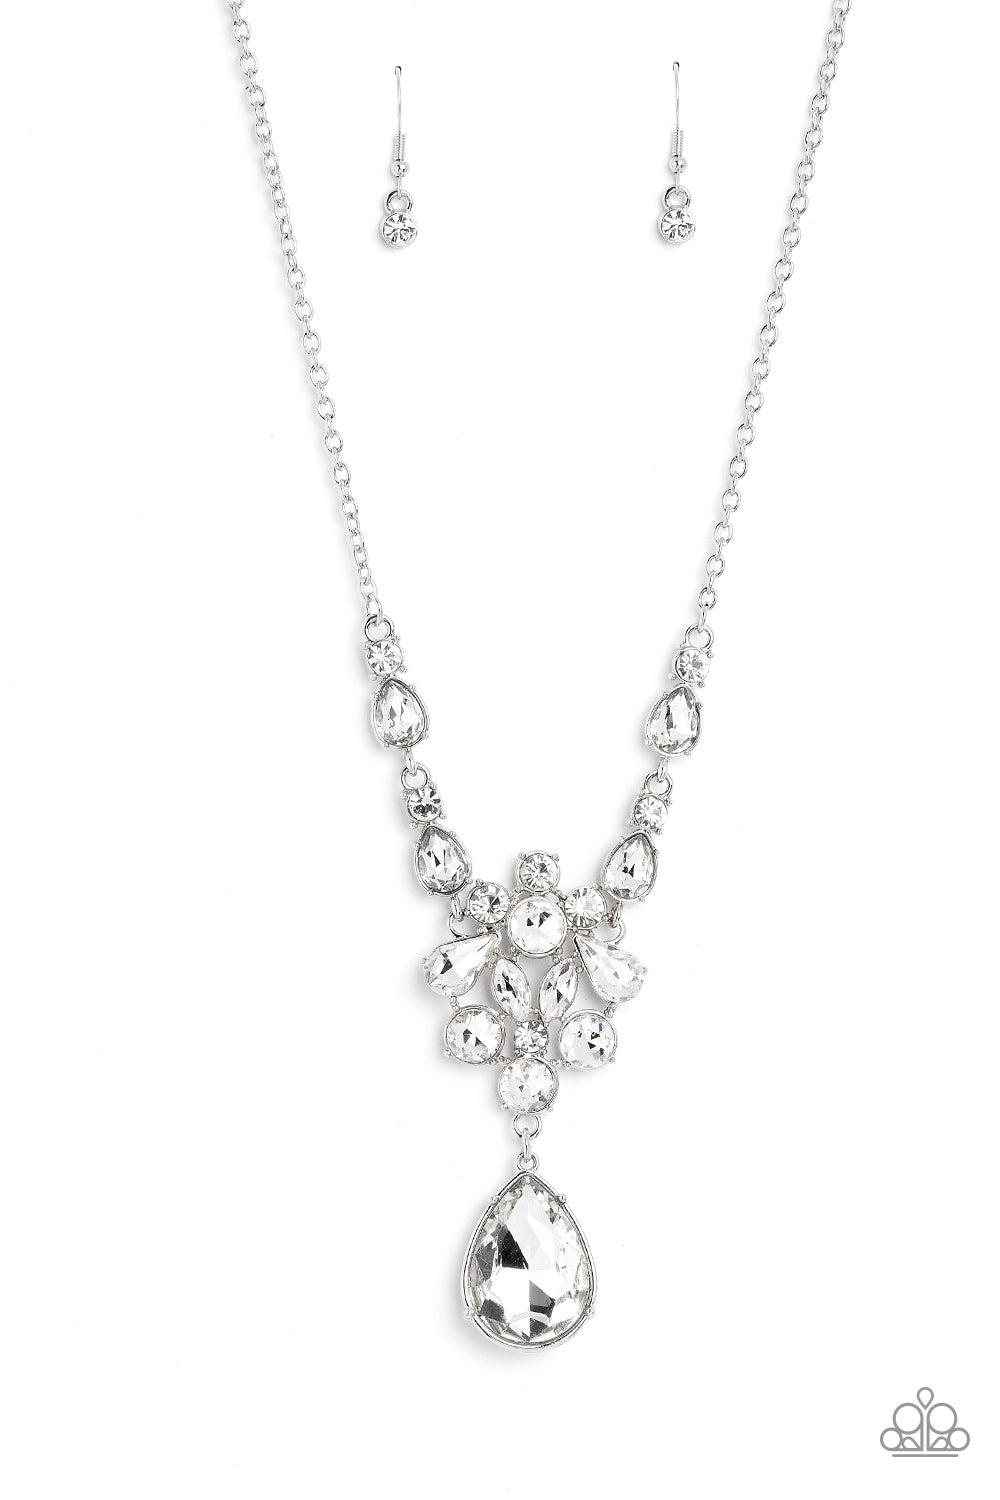 TWINKLE of an Eye White Rhinestone Necklace - Paparazzi Accessories- lightbox - CarasShop.com - $5 Jewelry by Cara Jewels